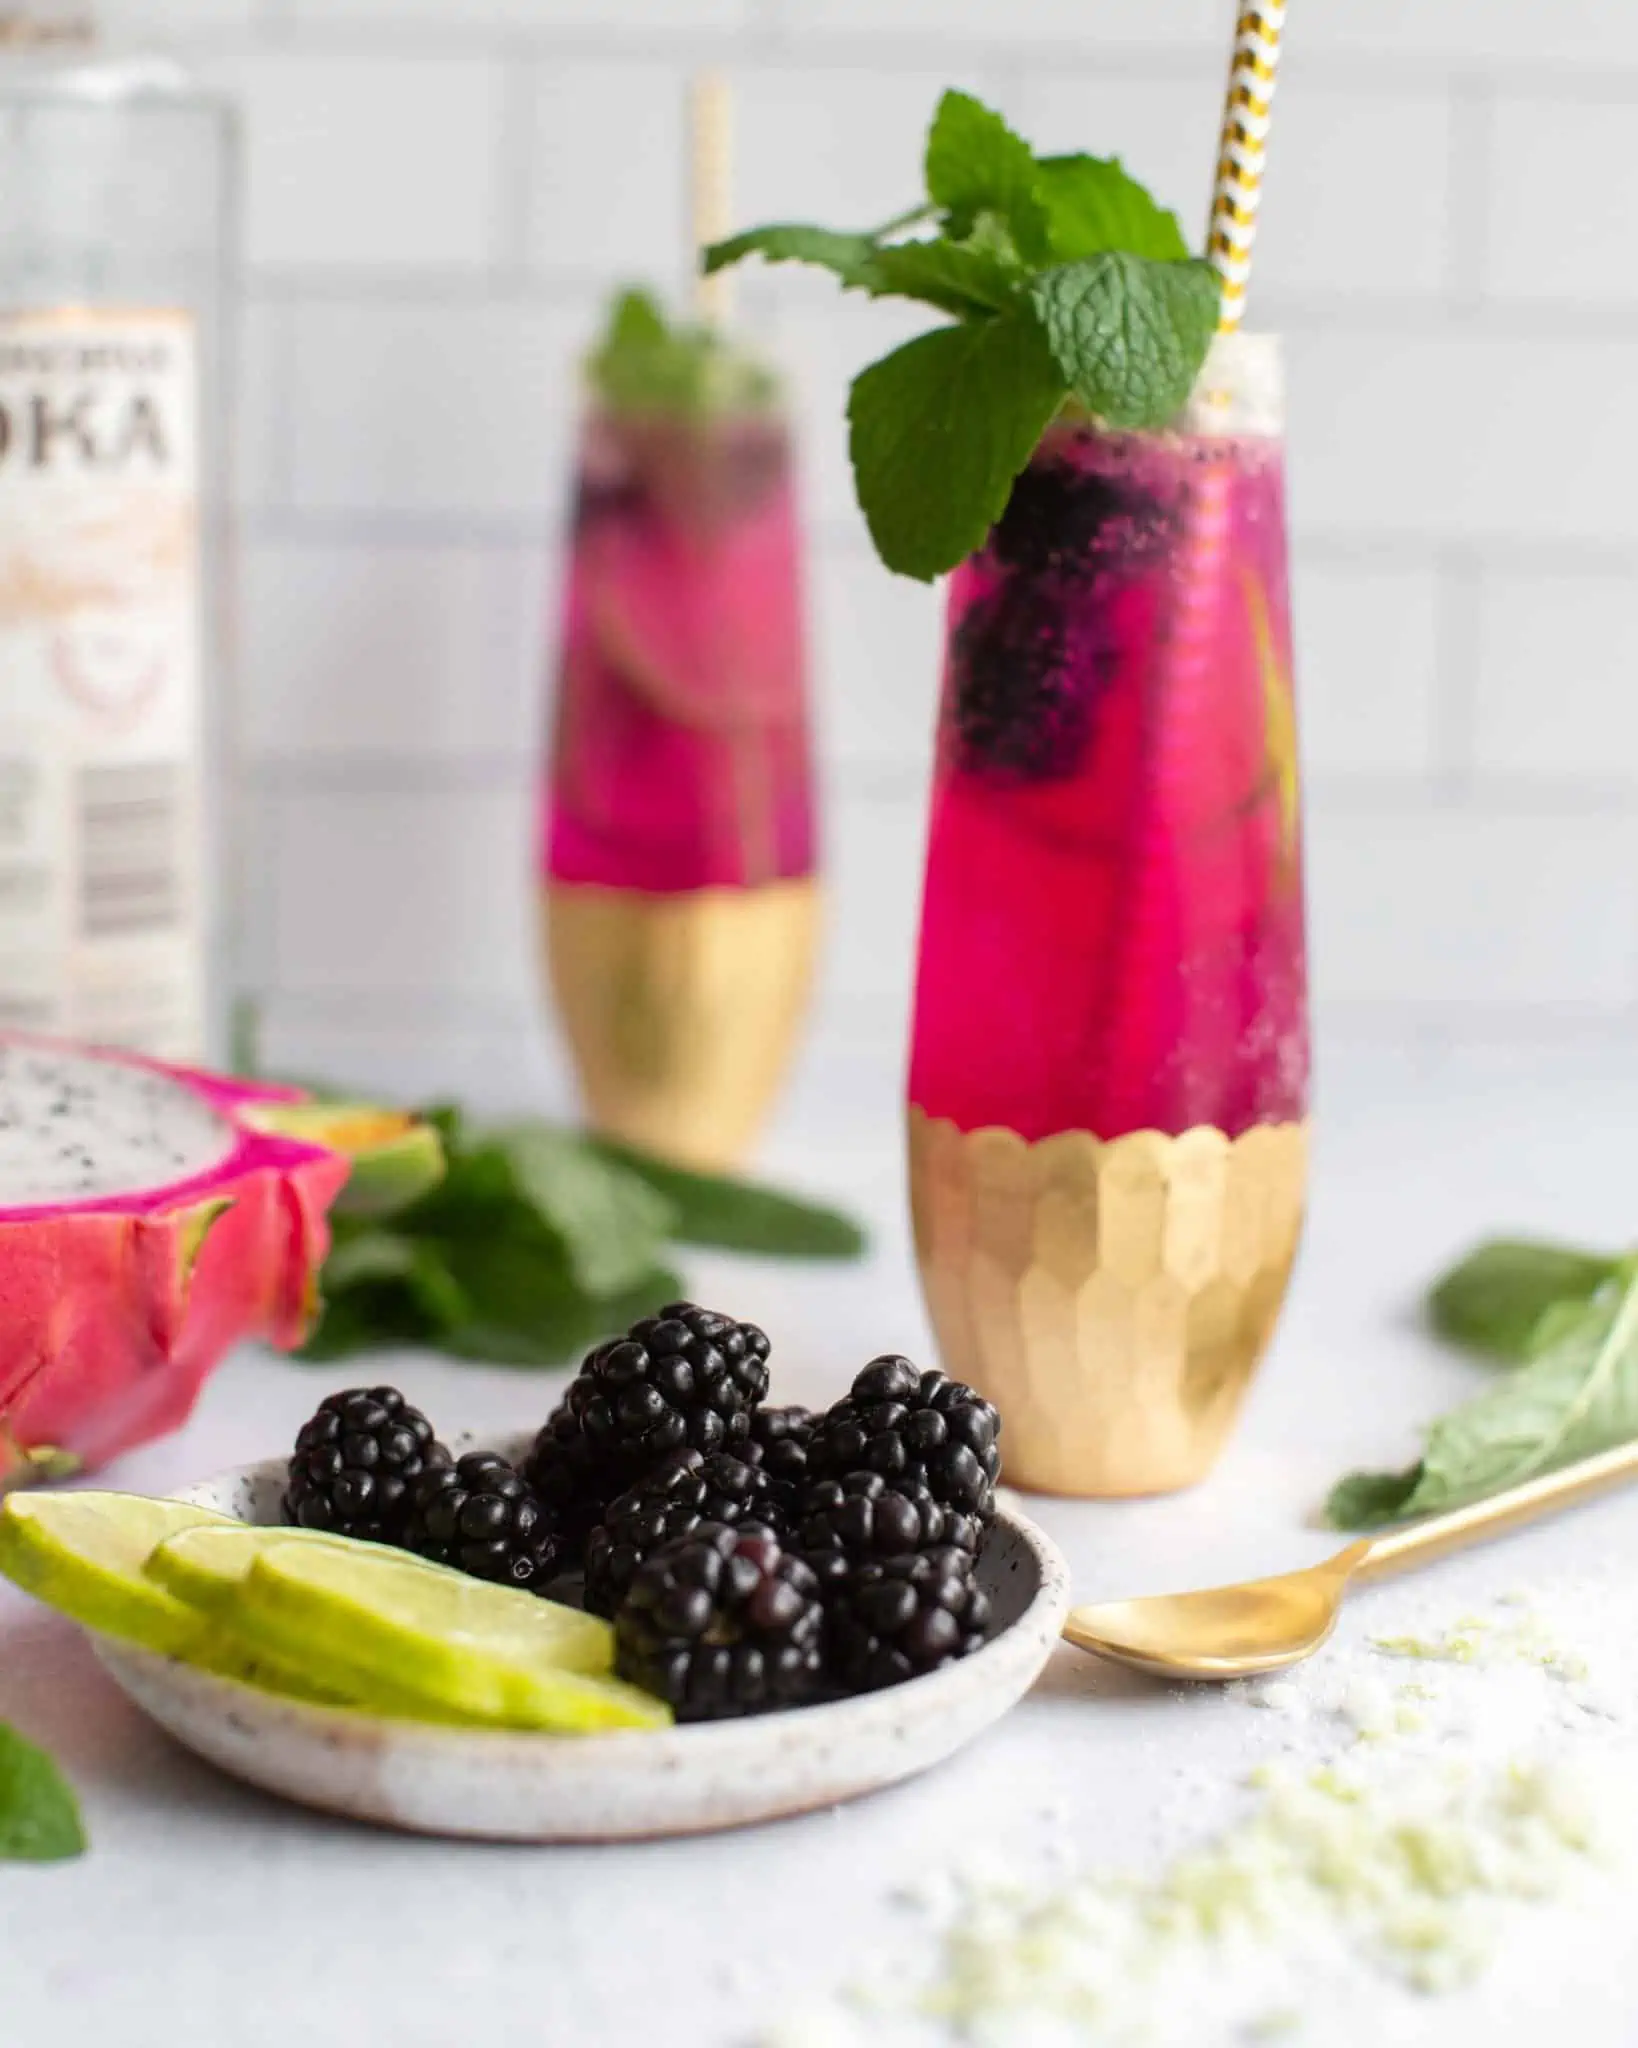 A dark pink dragonfruit cocktail in a tall glass painted gold at the bottom, garnished with fresh blackberries, sprigs of mint, and a gold and white paper straw.